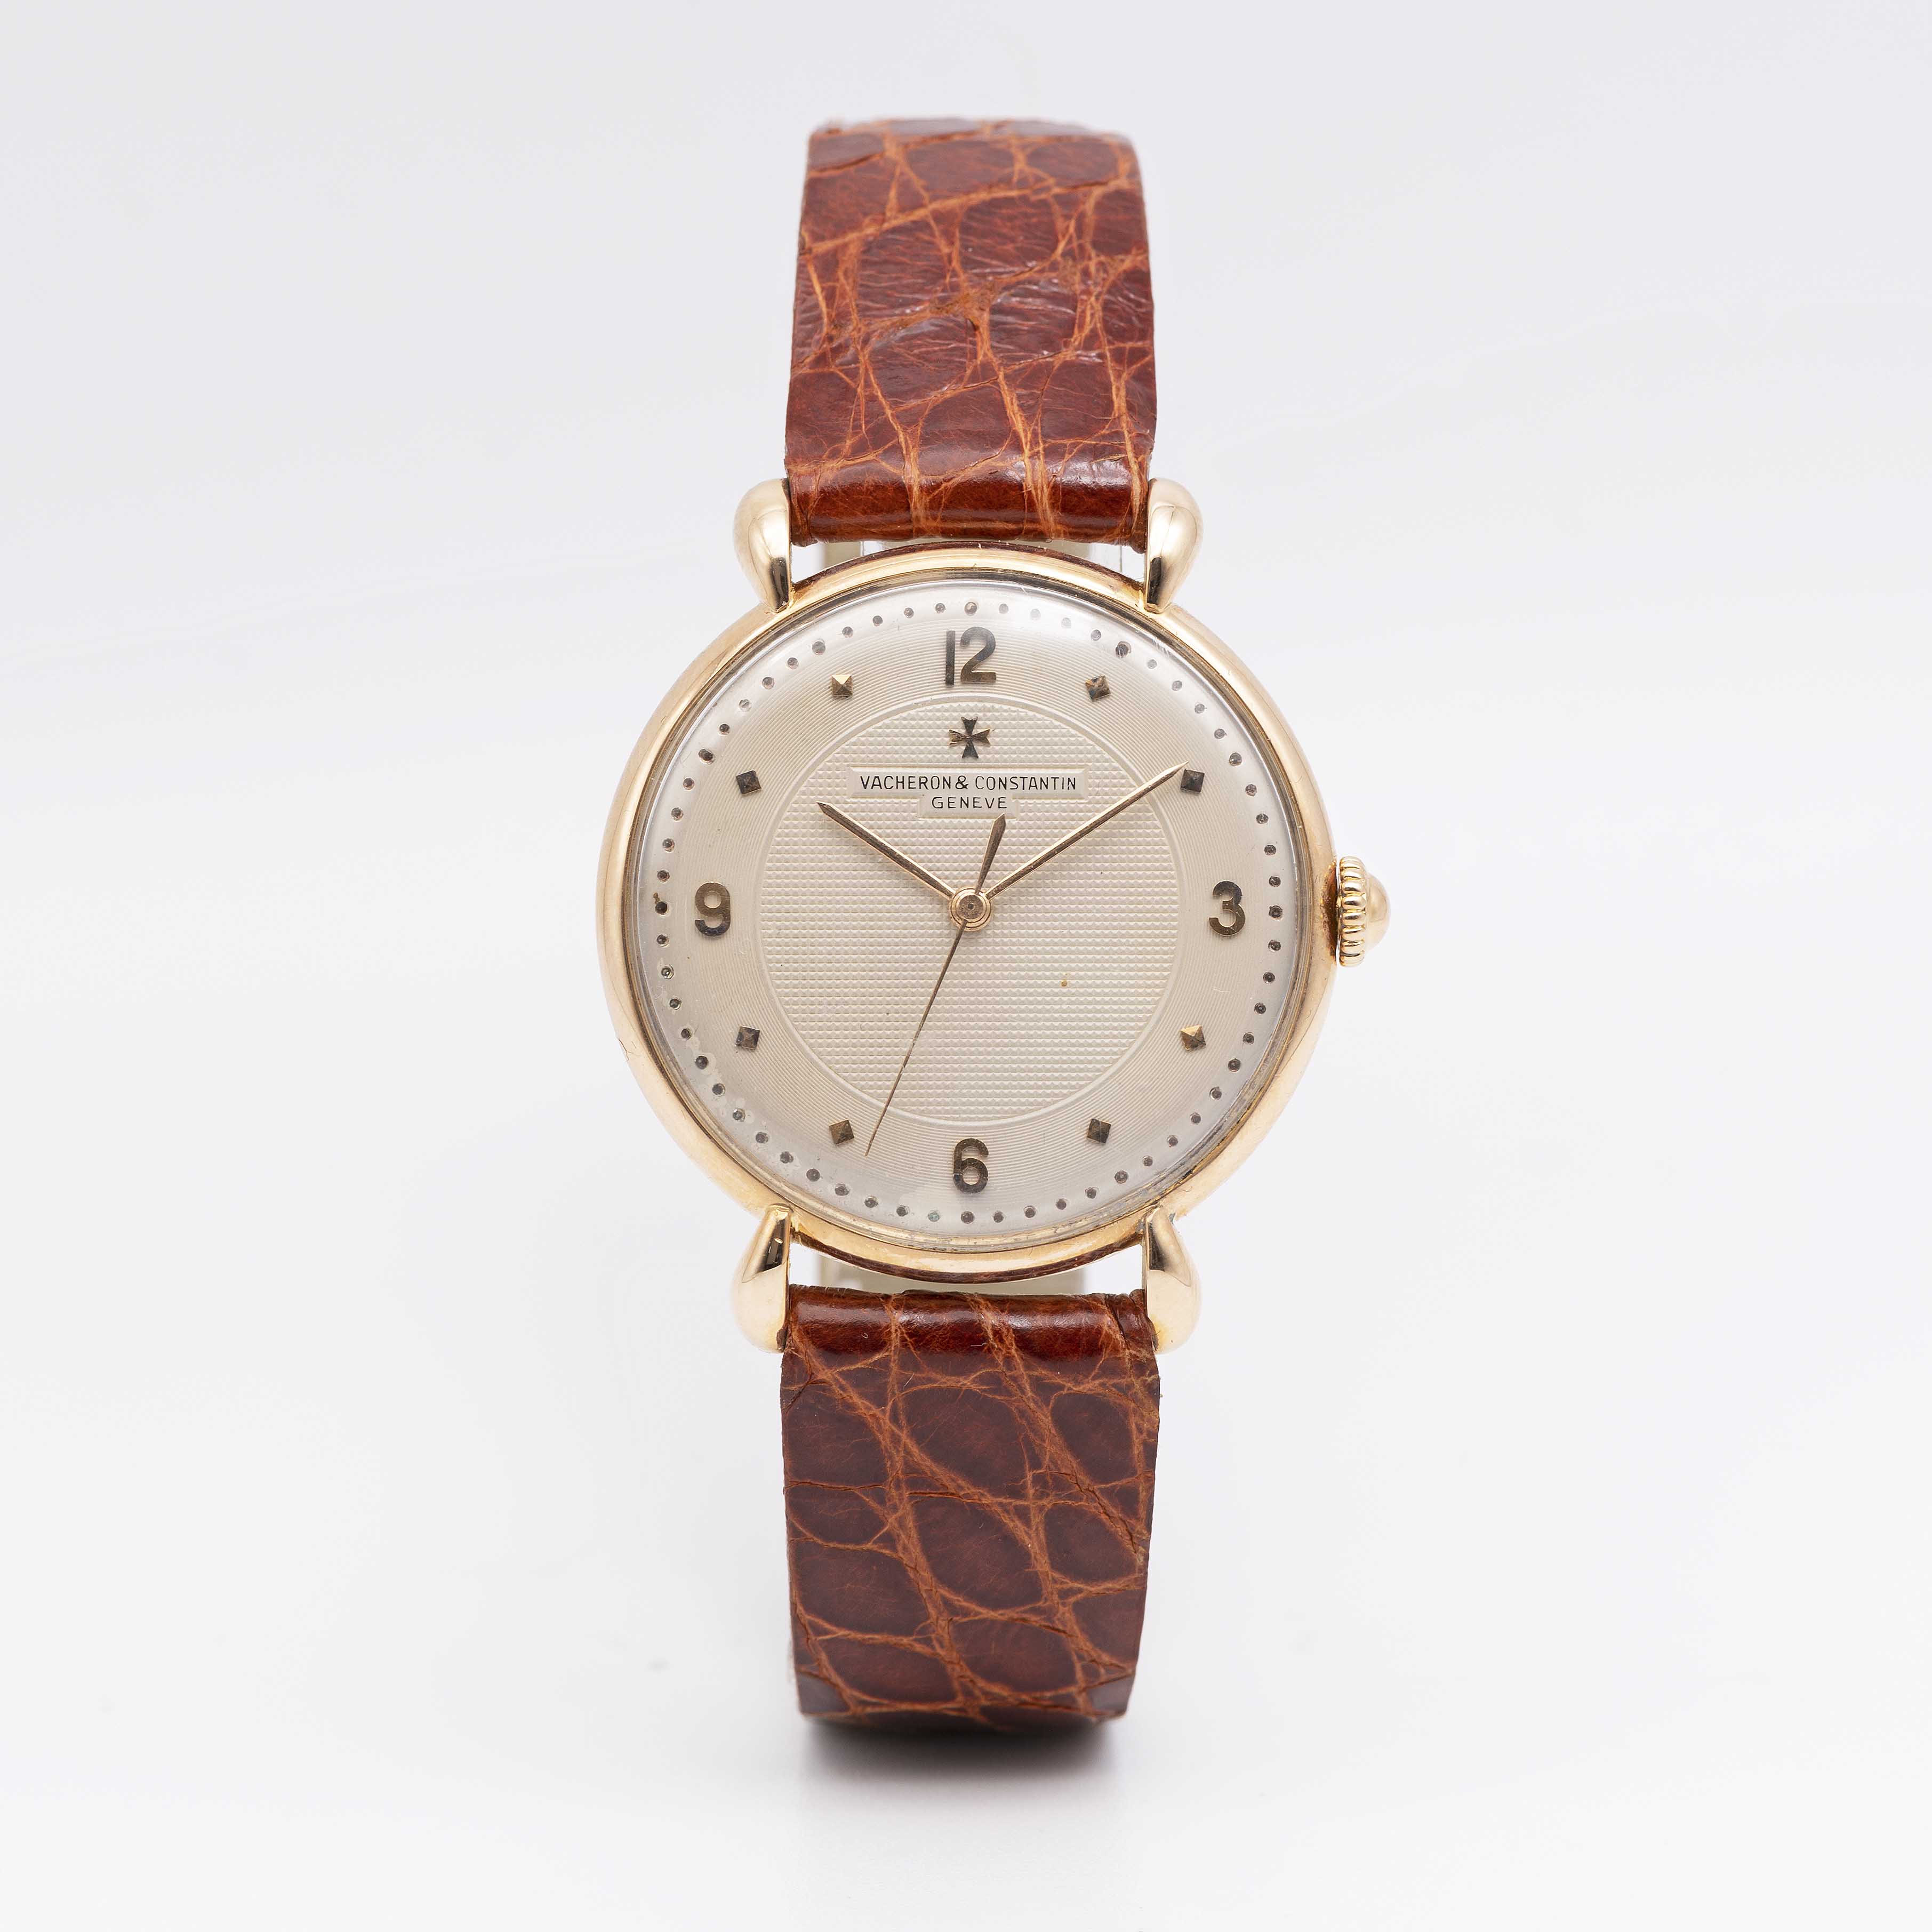 A GENTLEMAN'S 18K SOLID ROSE GOLD VACHERON & CONSTANTIN WRIST WATCH CIRCA 1950s, WITH GUILLOCHE DIAL - Image 2 of 8